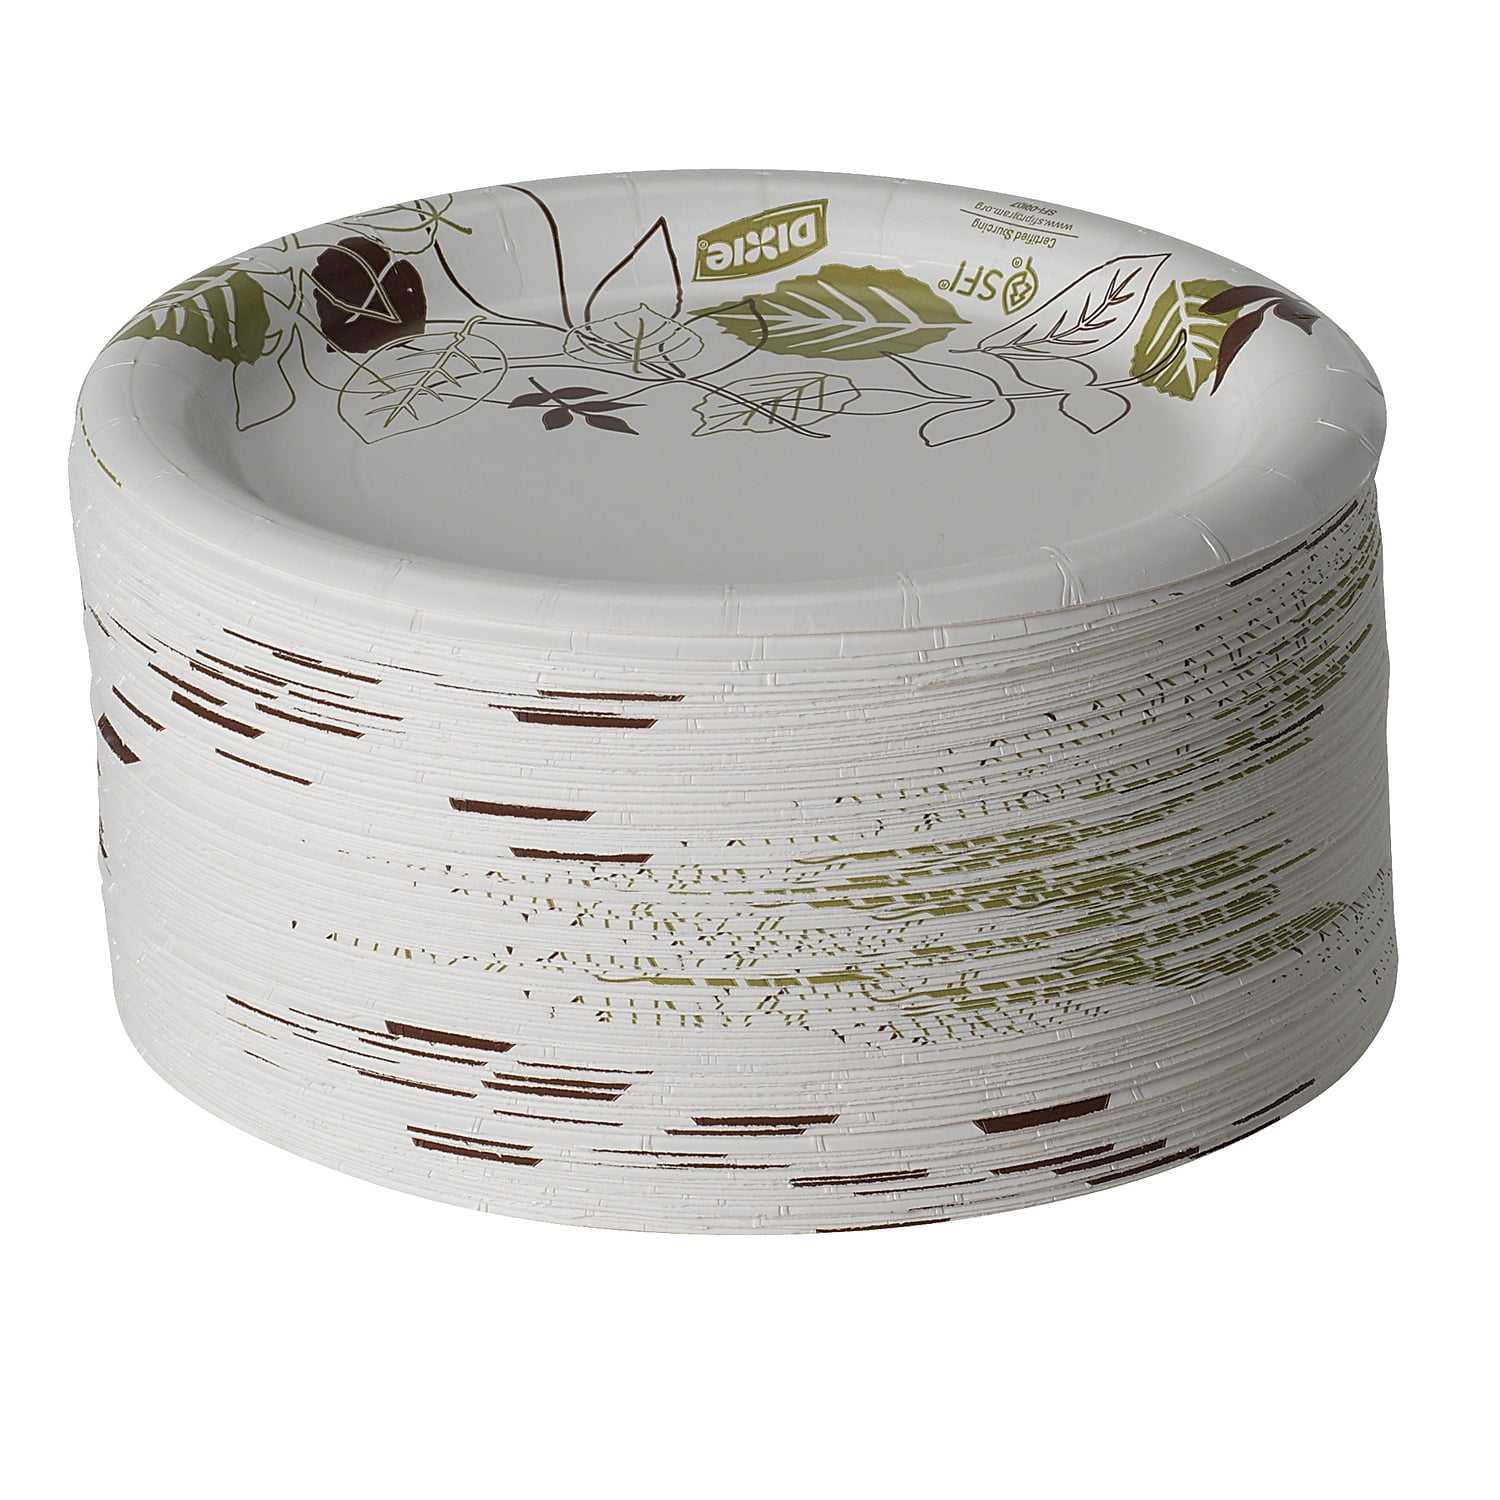 DXEUX7WS - Dixie Pathways 7 Medium-weight Paper Plates by GP Pro